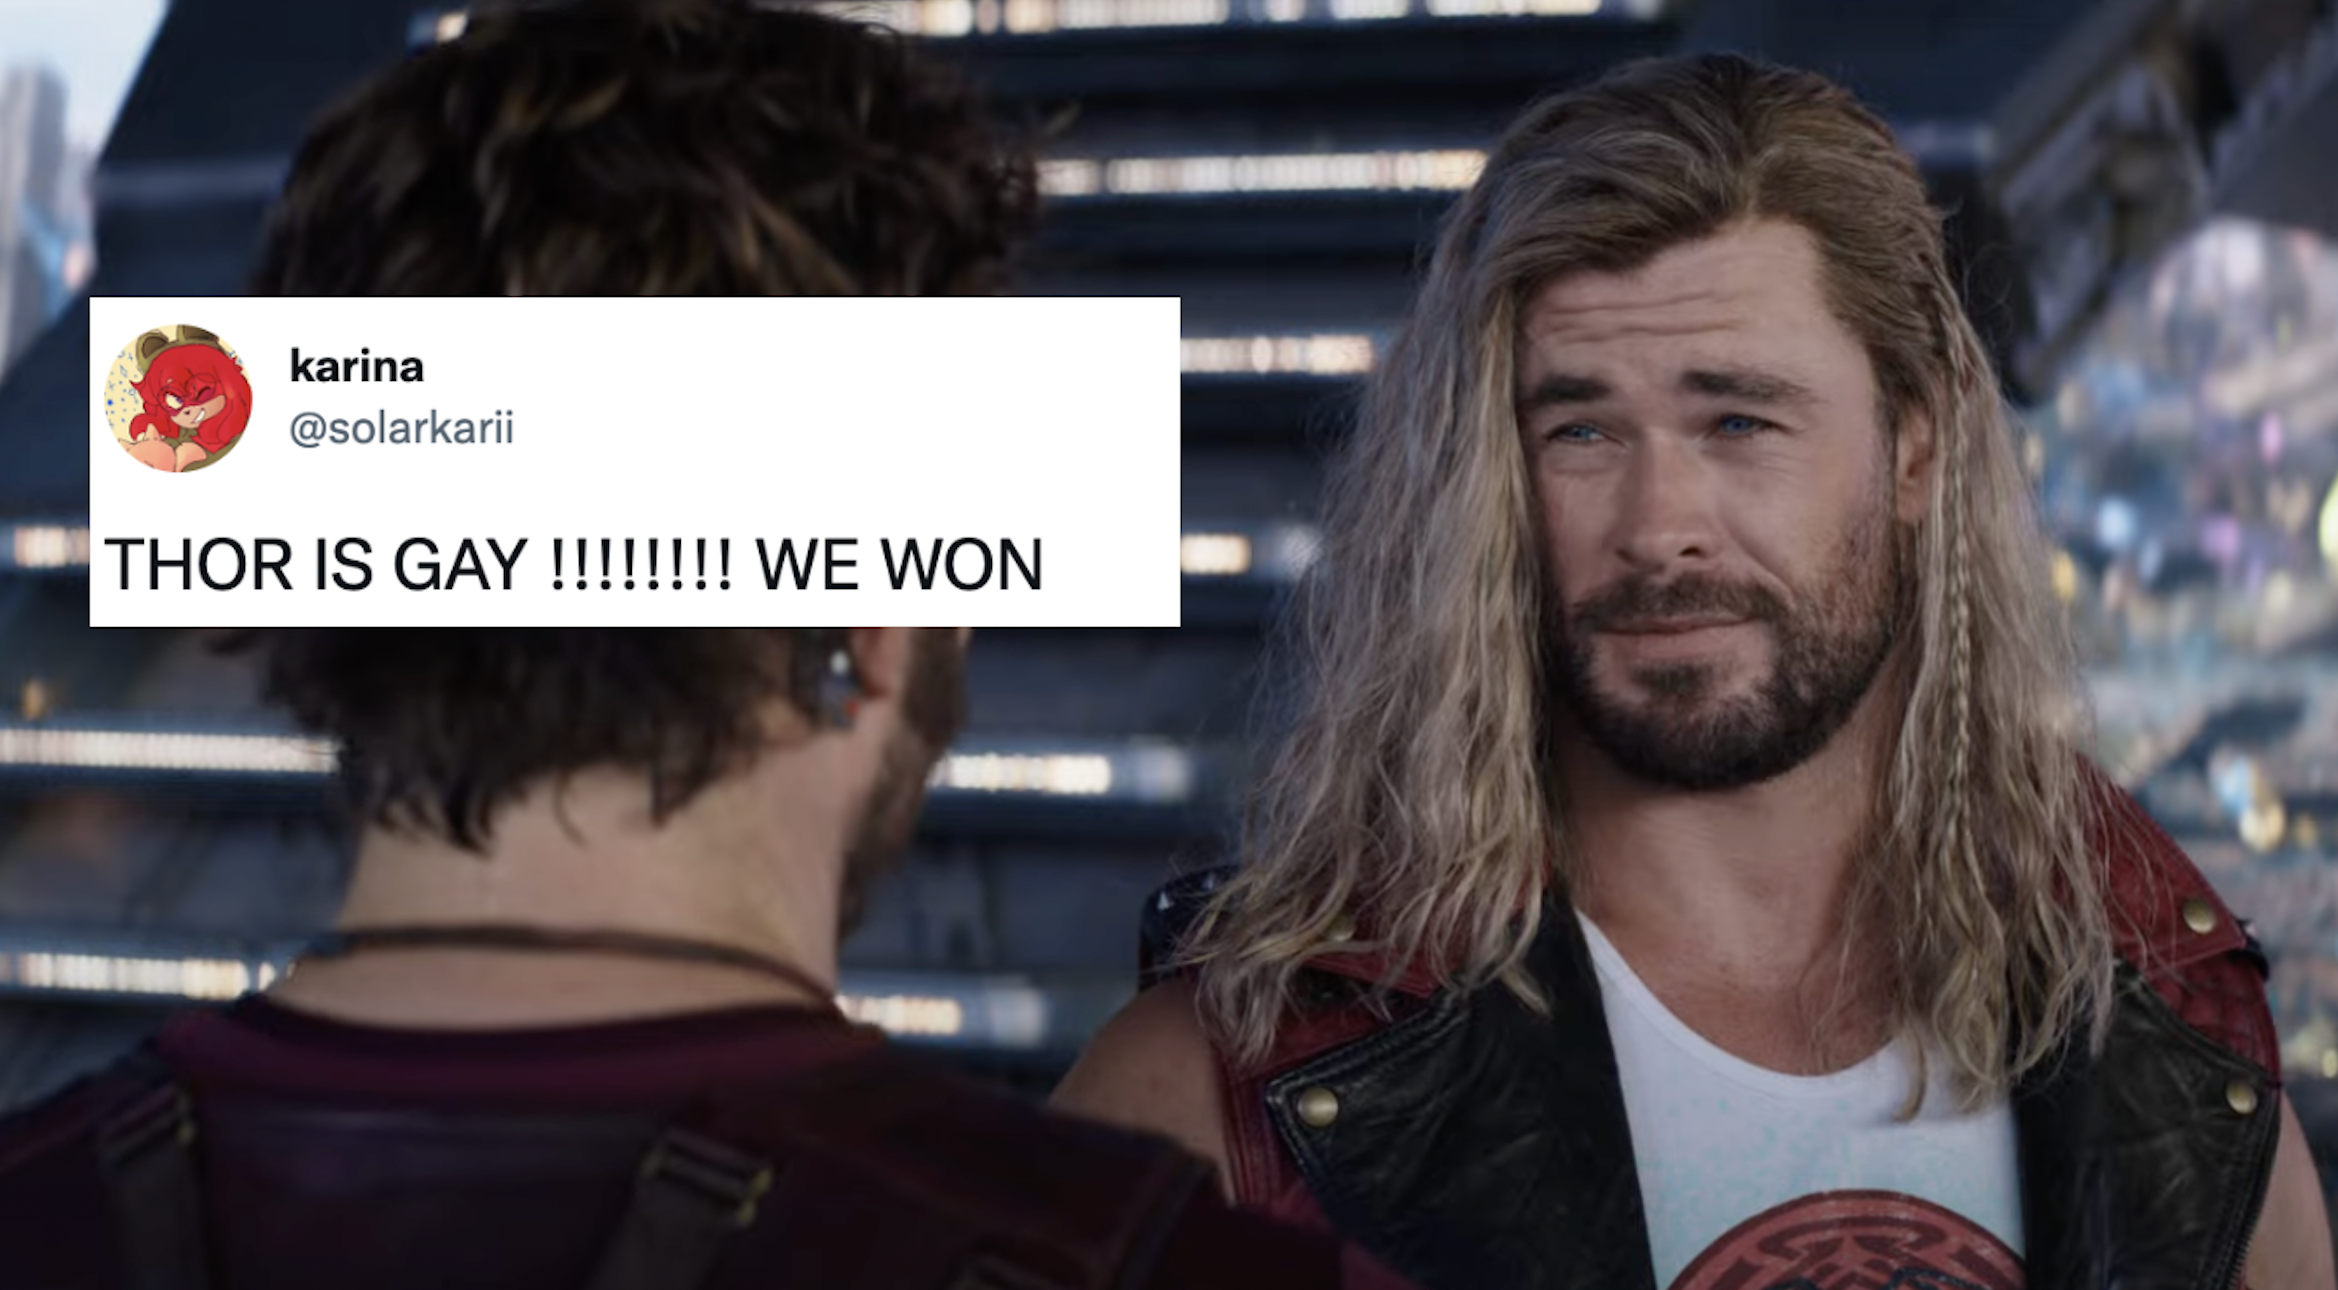 The First Love And Thunder Teaser Is Here & It’s Sparked A Hot Debate About Thor’s Sexuality